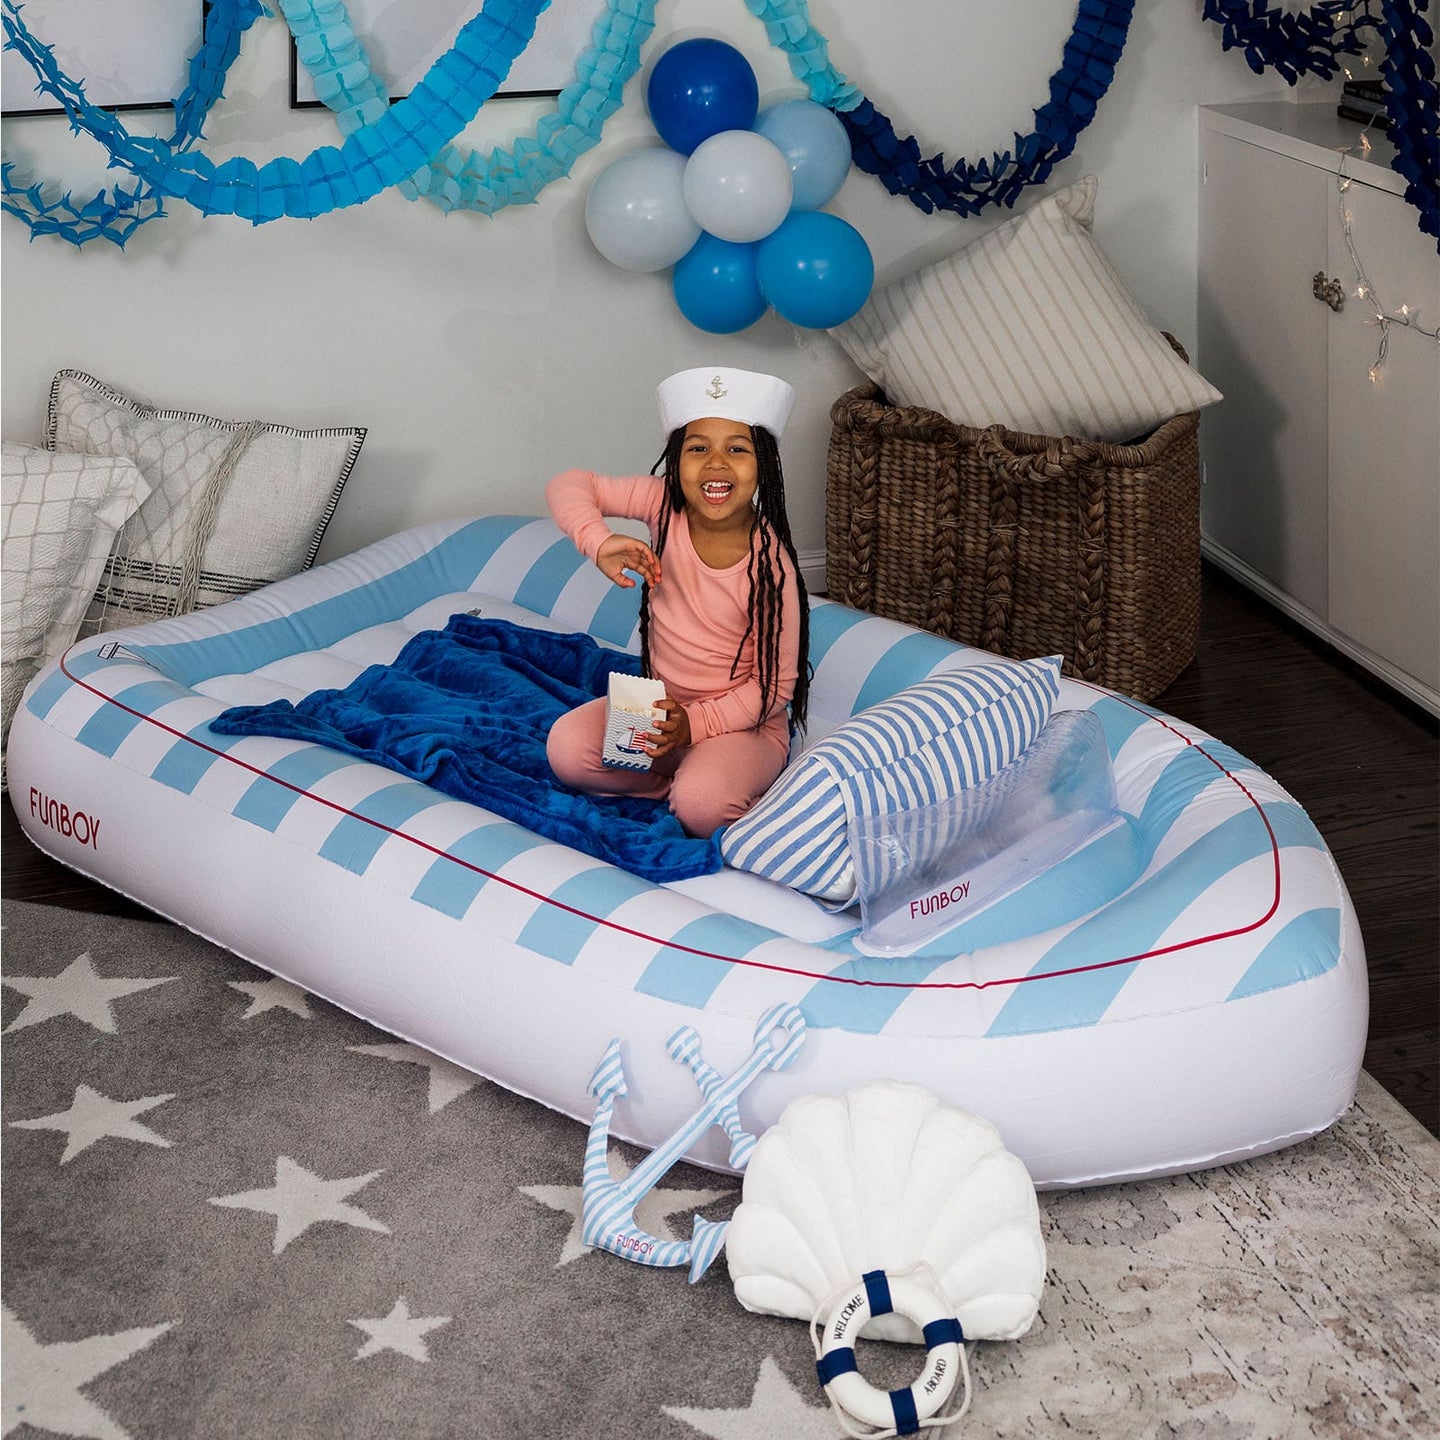 Kids Air Mattress Sleepover Bed by FUNBOY. Boat